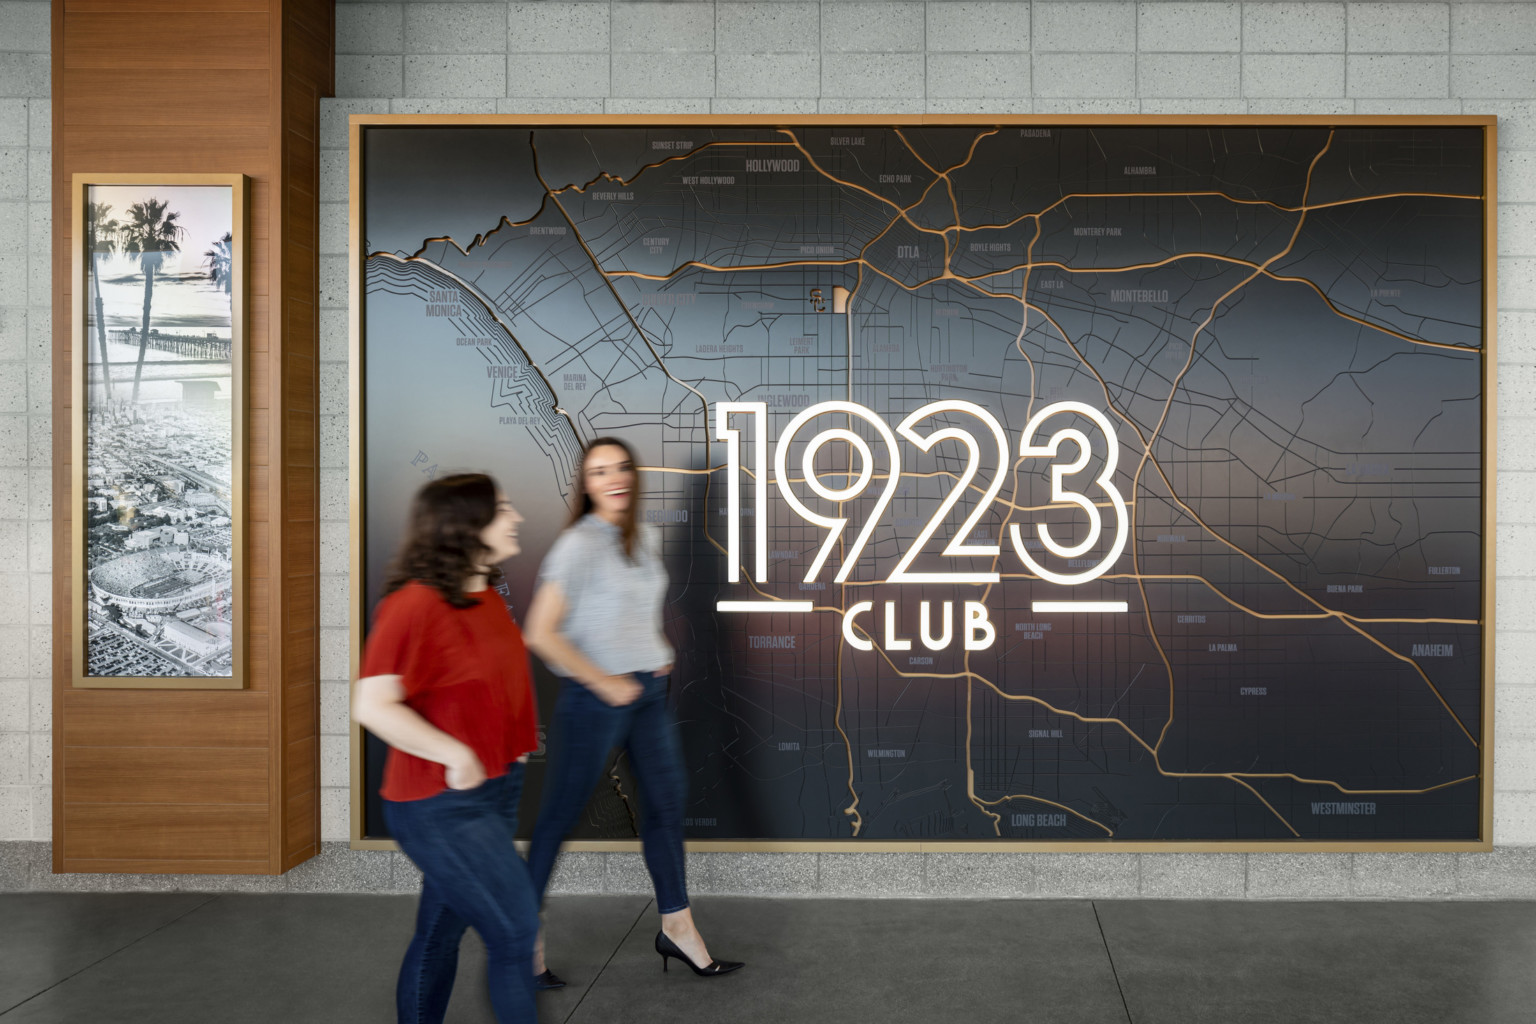 1923 Club logo illuminated in custom wall art engraving of Los Angeles map in gold frame on grey block wall. wood accent left